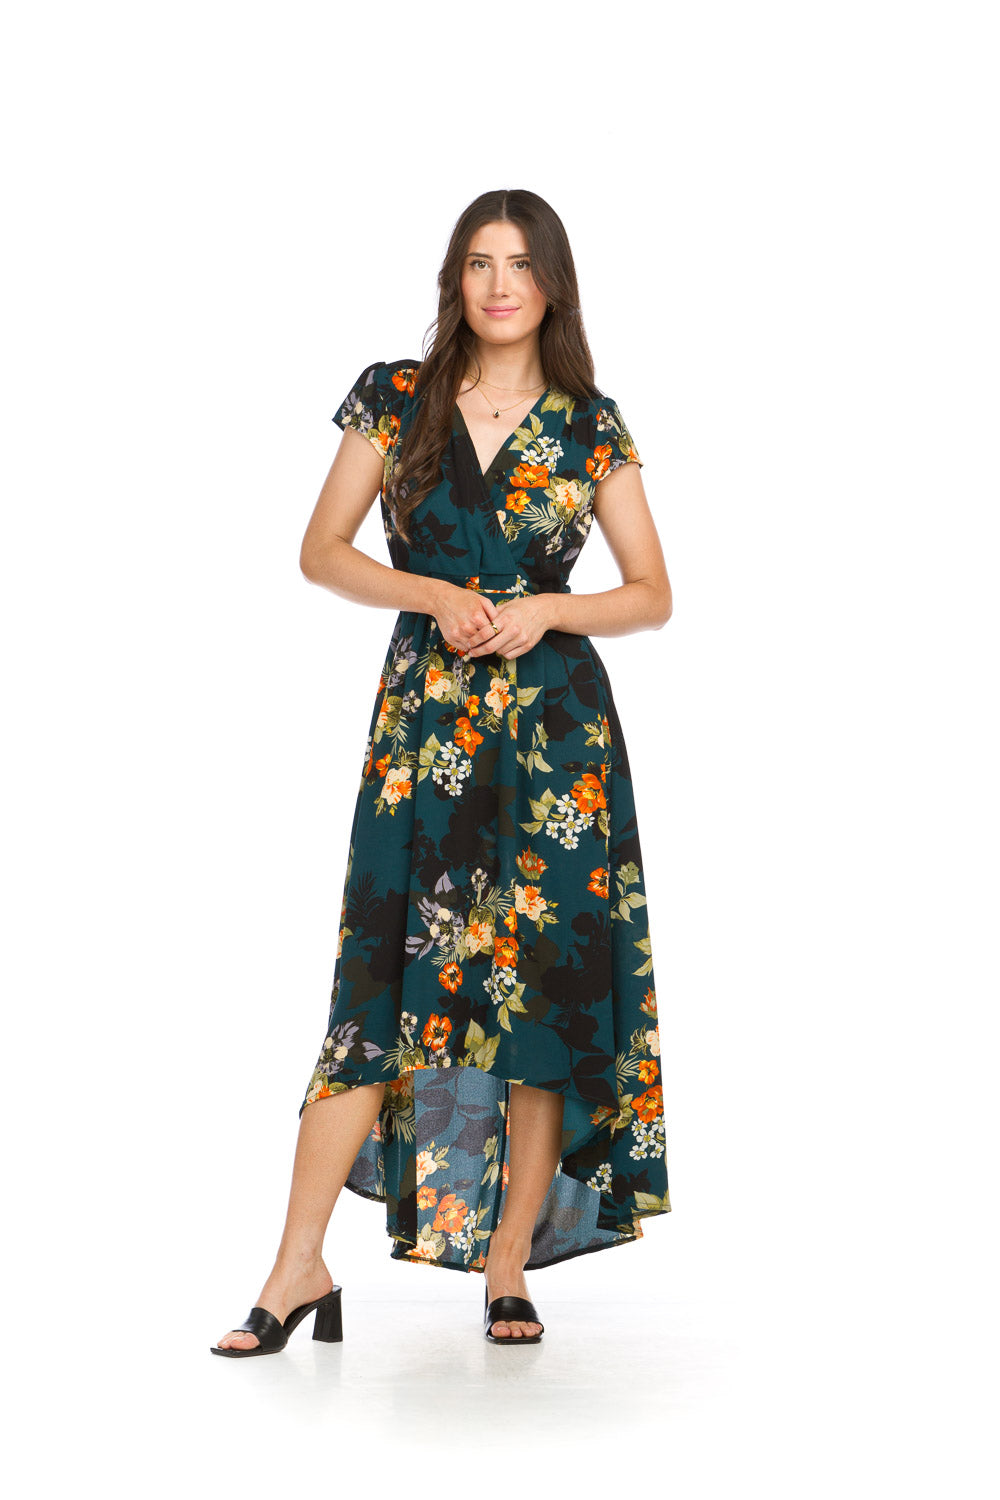 PD16516 TEAL Crepe Floral Print High Low Maxi w Wrap Top